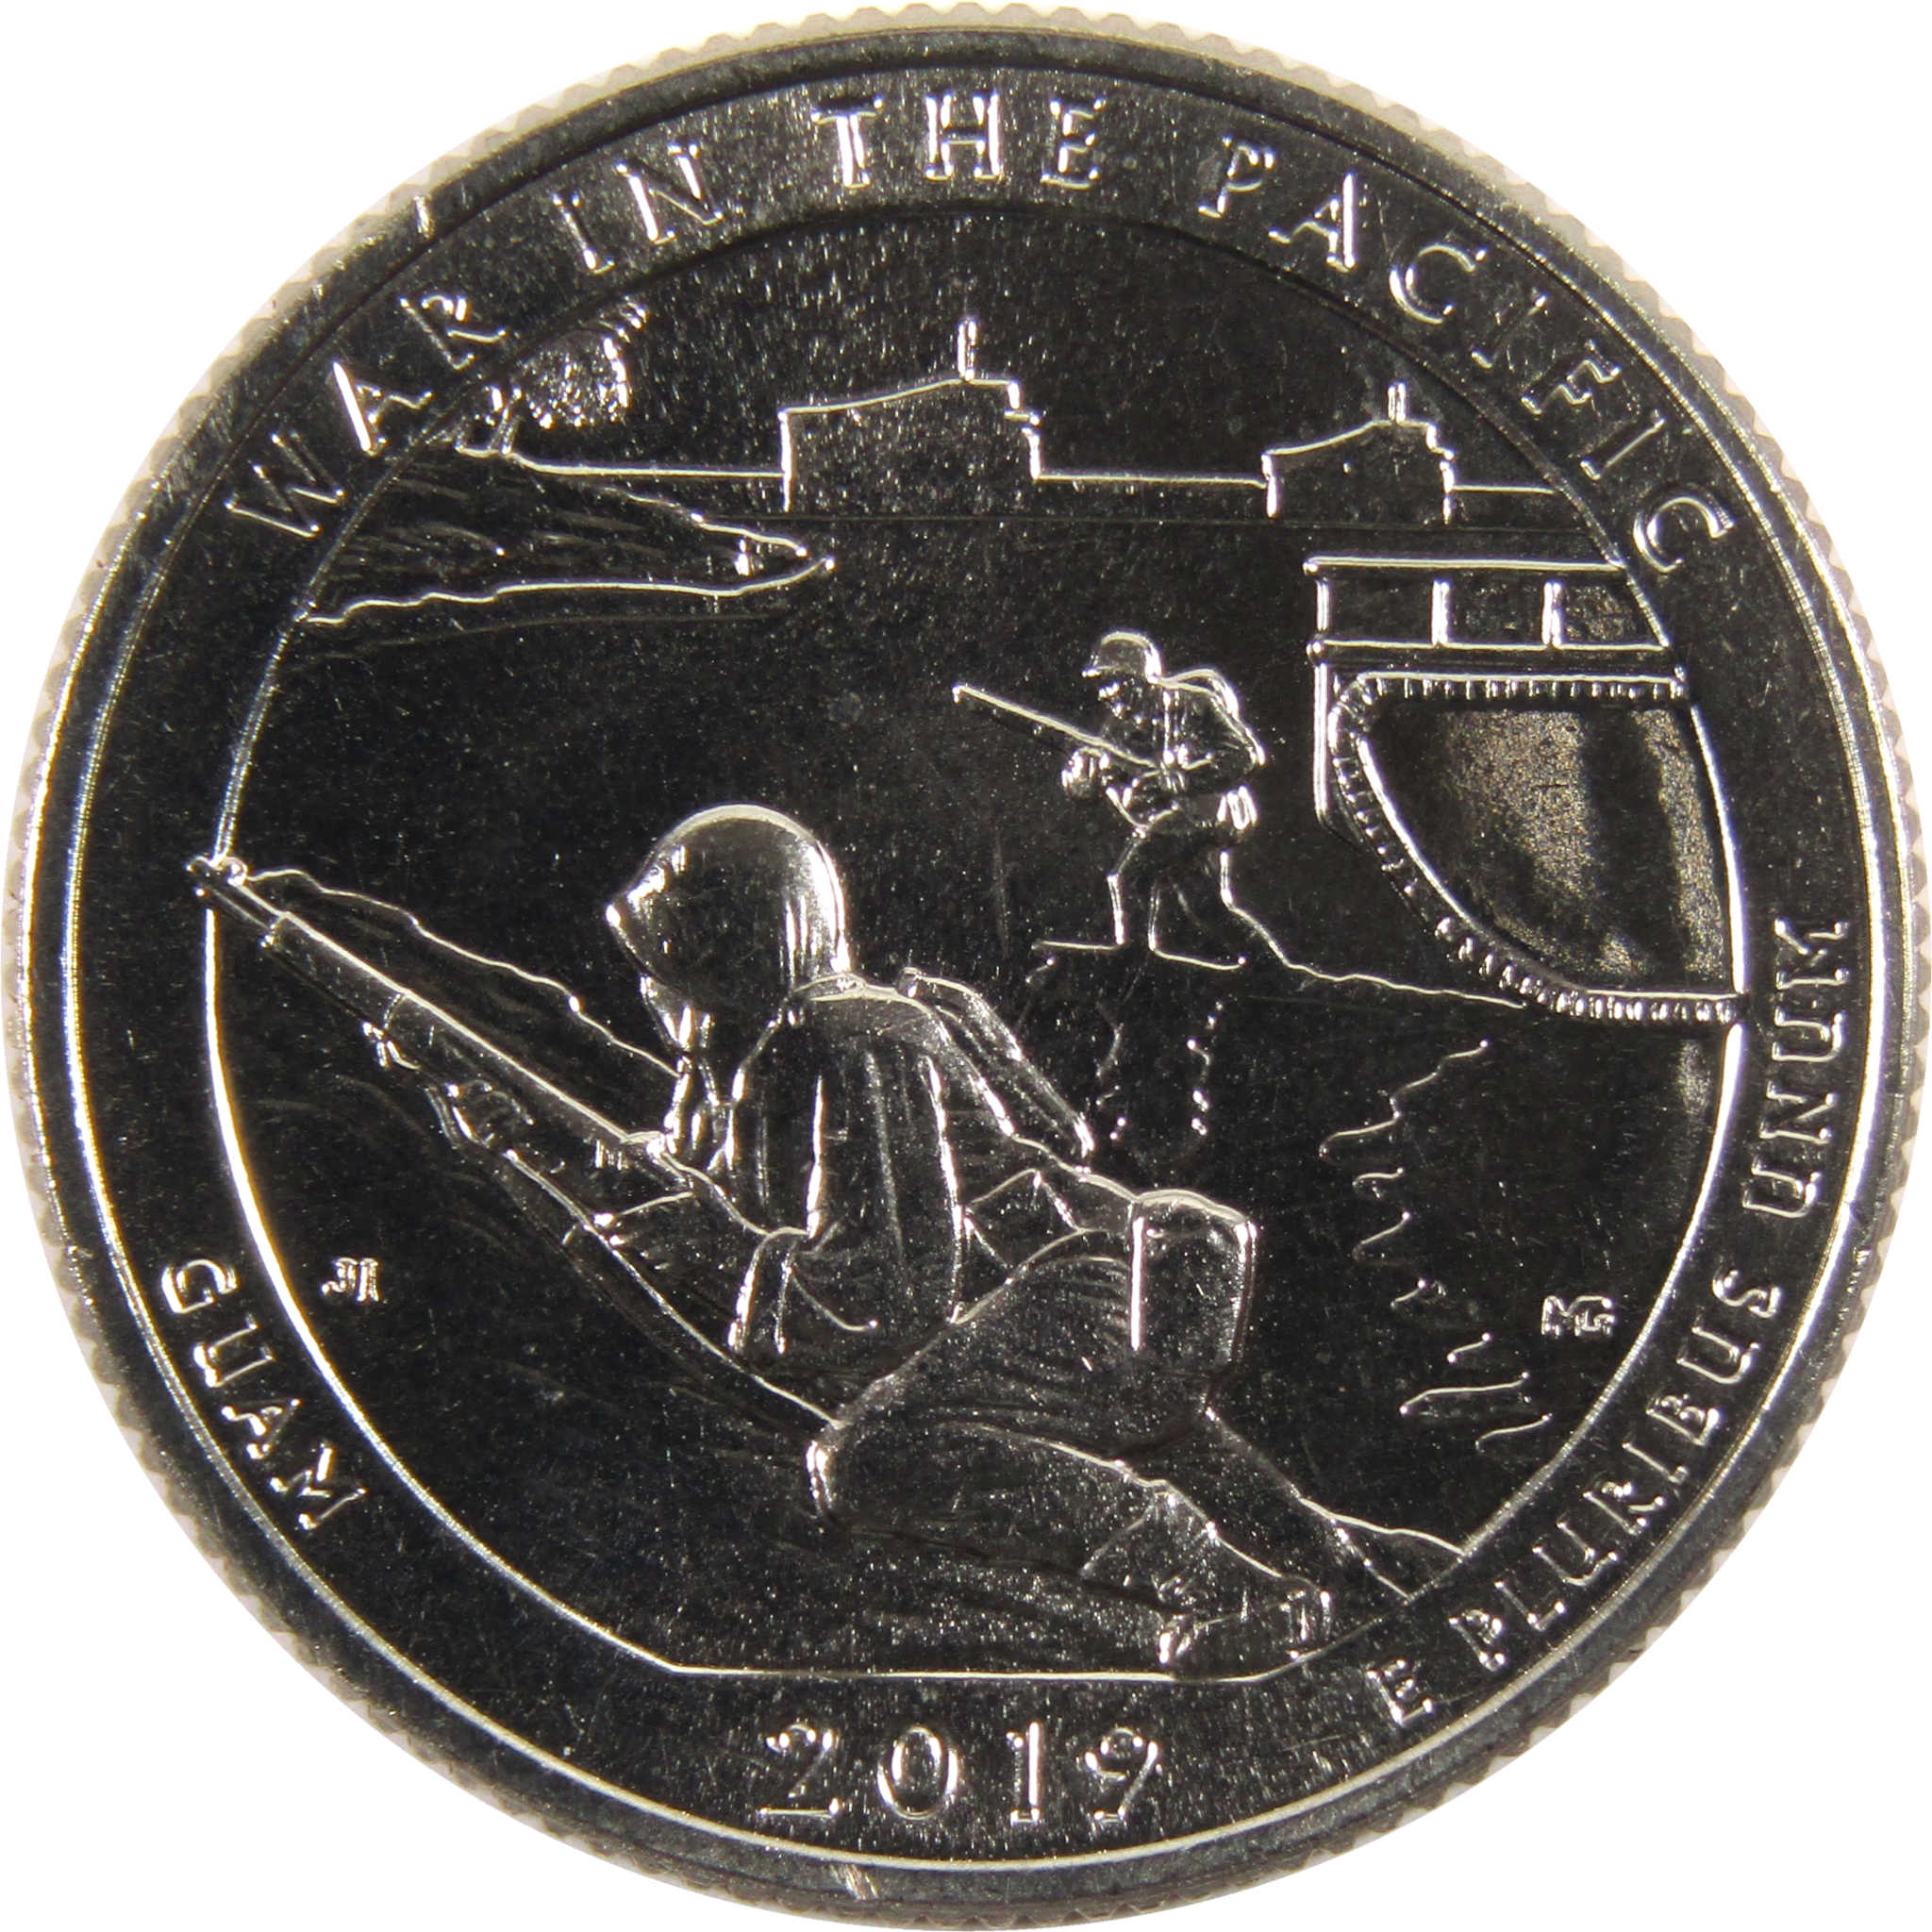 2019 S War in the Pacific National Park Quarter Uncirculated Clad Coin